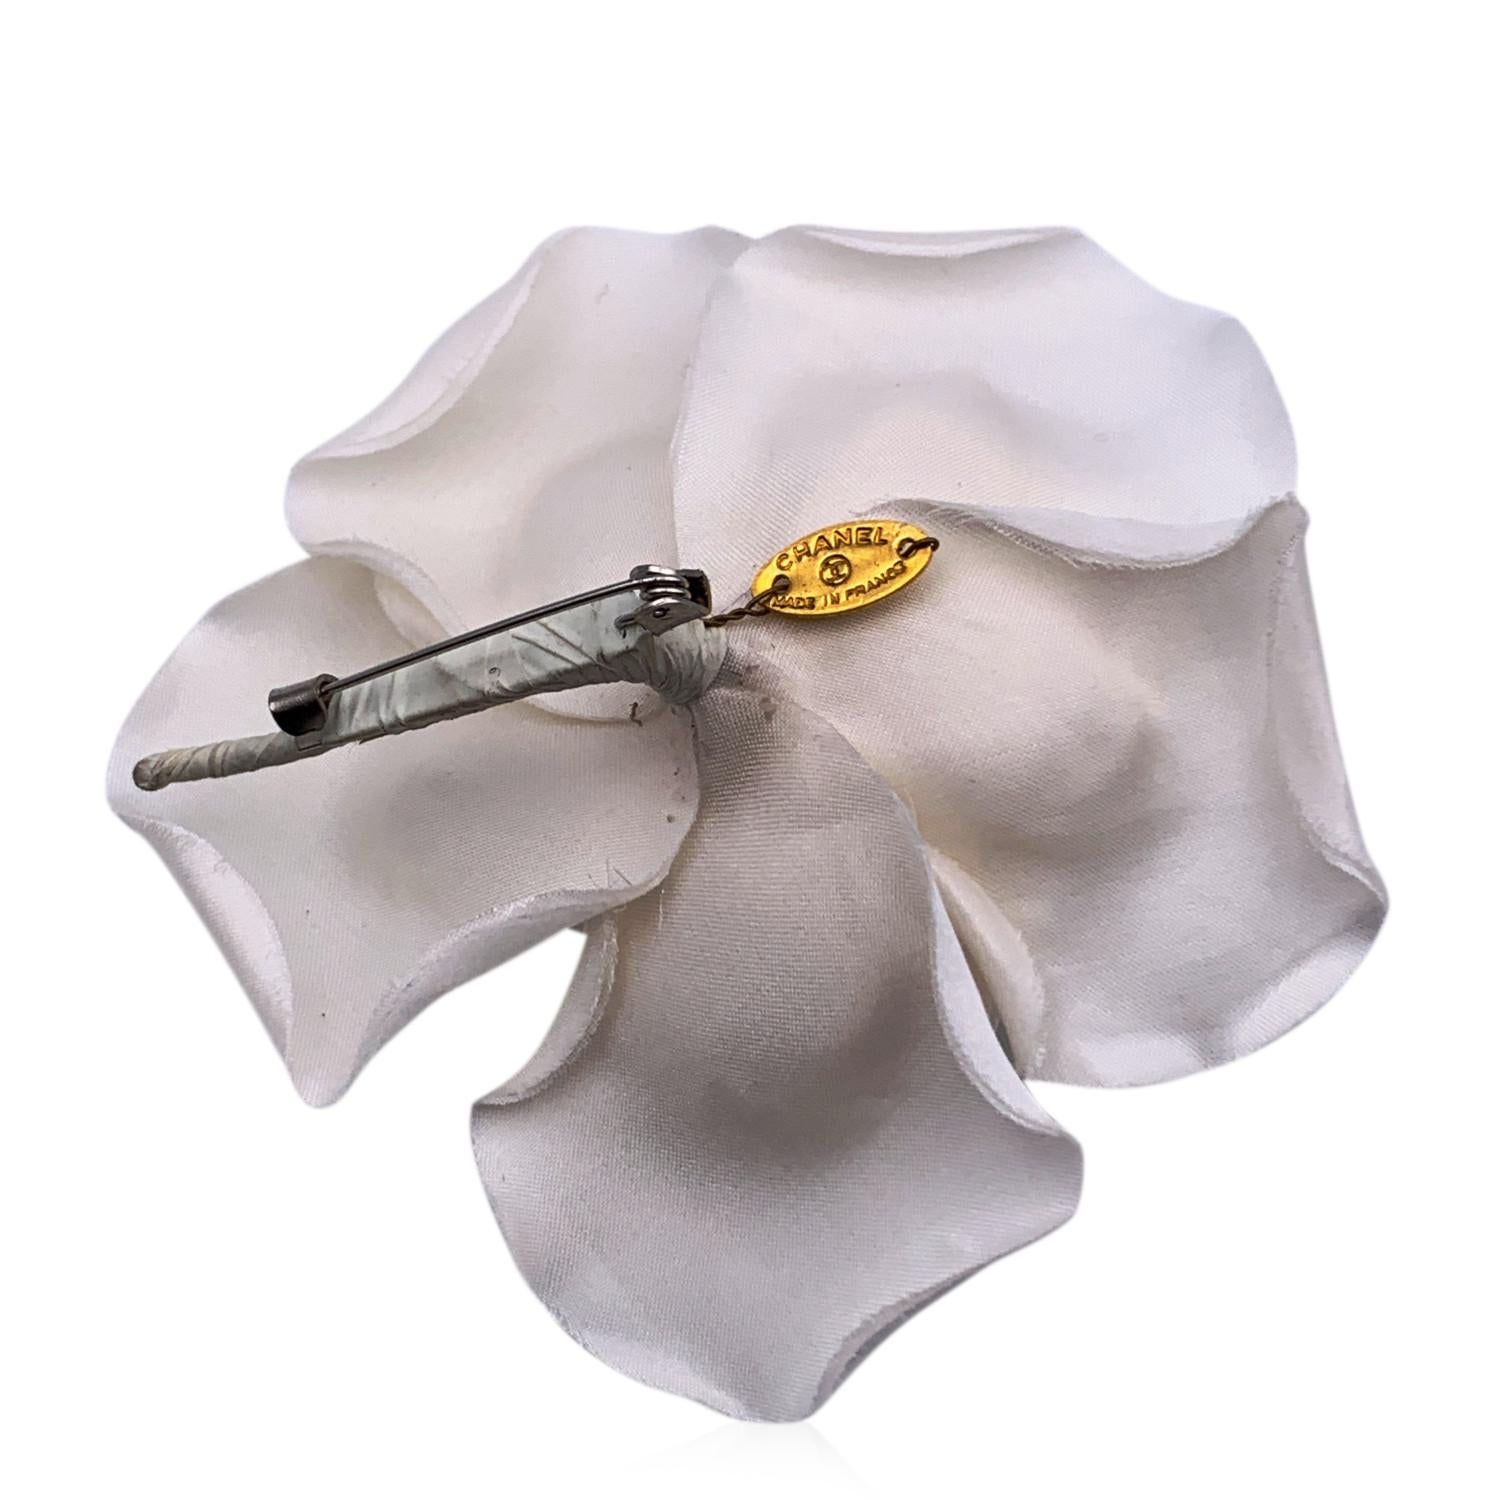 Chanel Vintage Rose Camellia Flower Pin Brooch. White satin petals. Safety pin closure. Measurements: diameter: 3 inches - 7.5 cm. 'CHANEL - CC - Made in France' oval tab on the back

Condition

A - EXCELLENT

Gently used. Chanel box included.